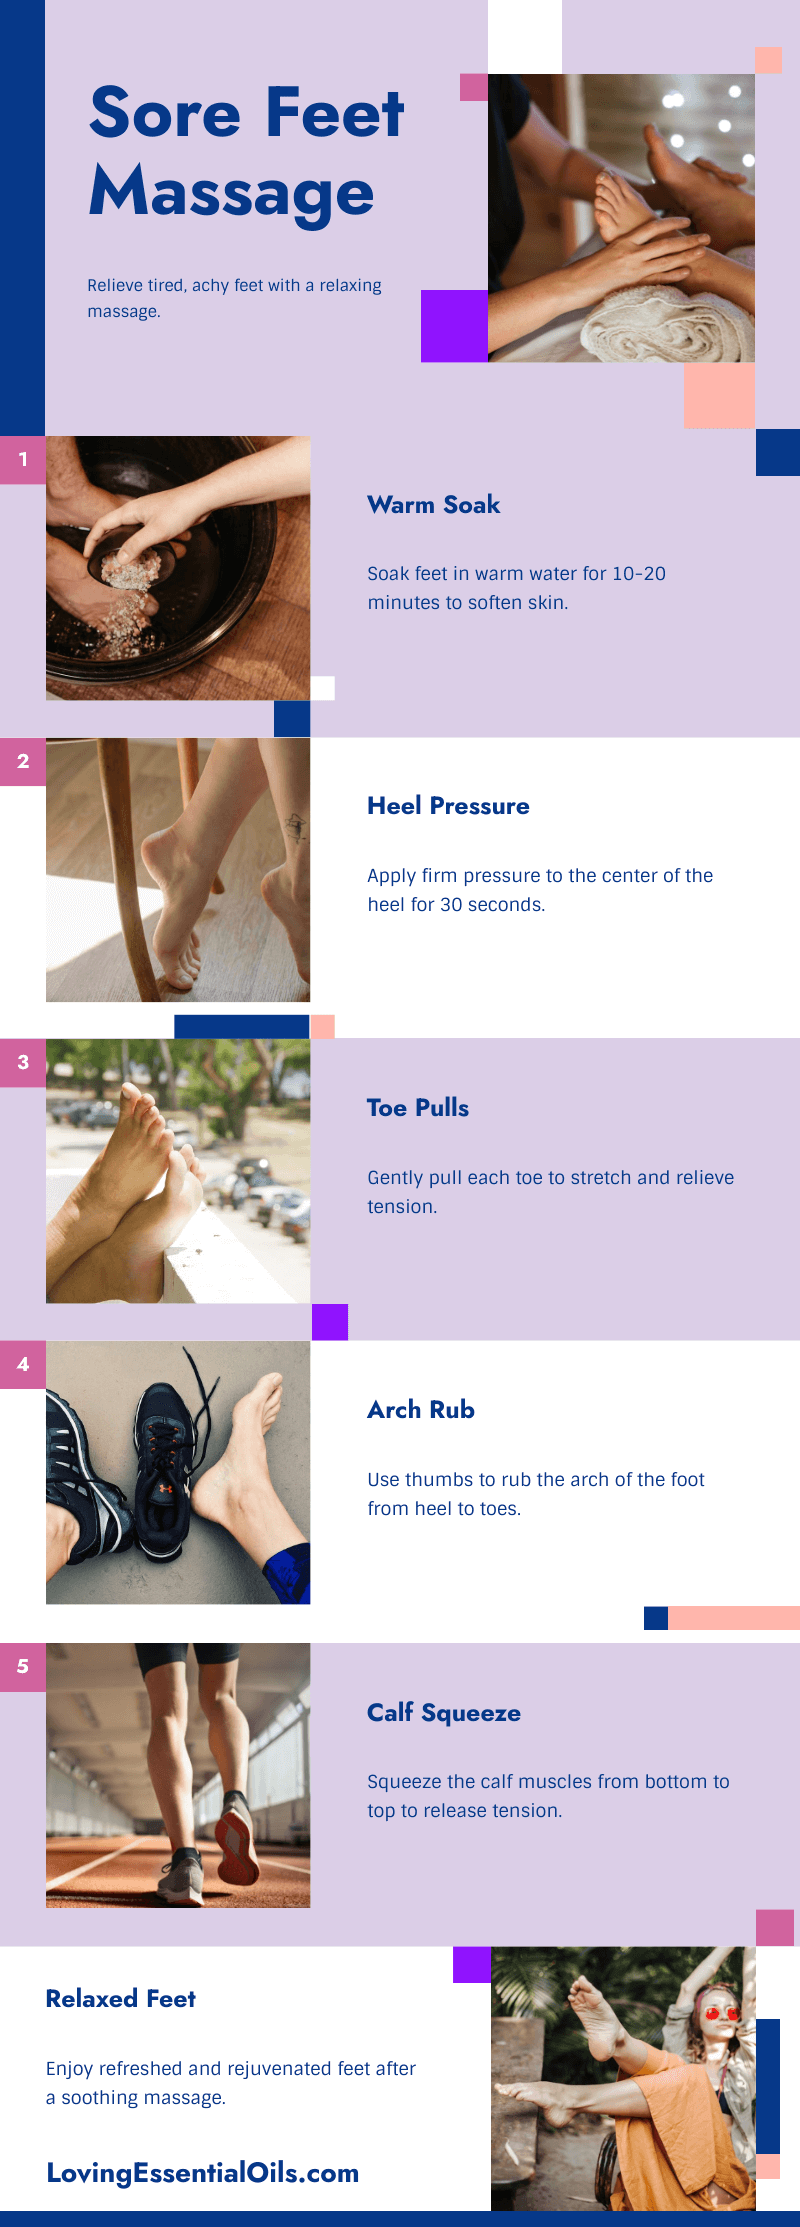 How to perform foot massage for sore feet